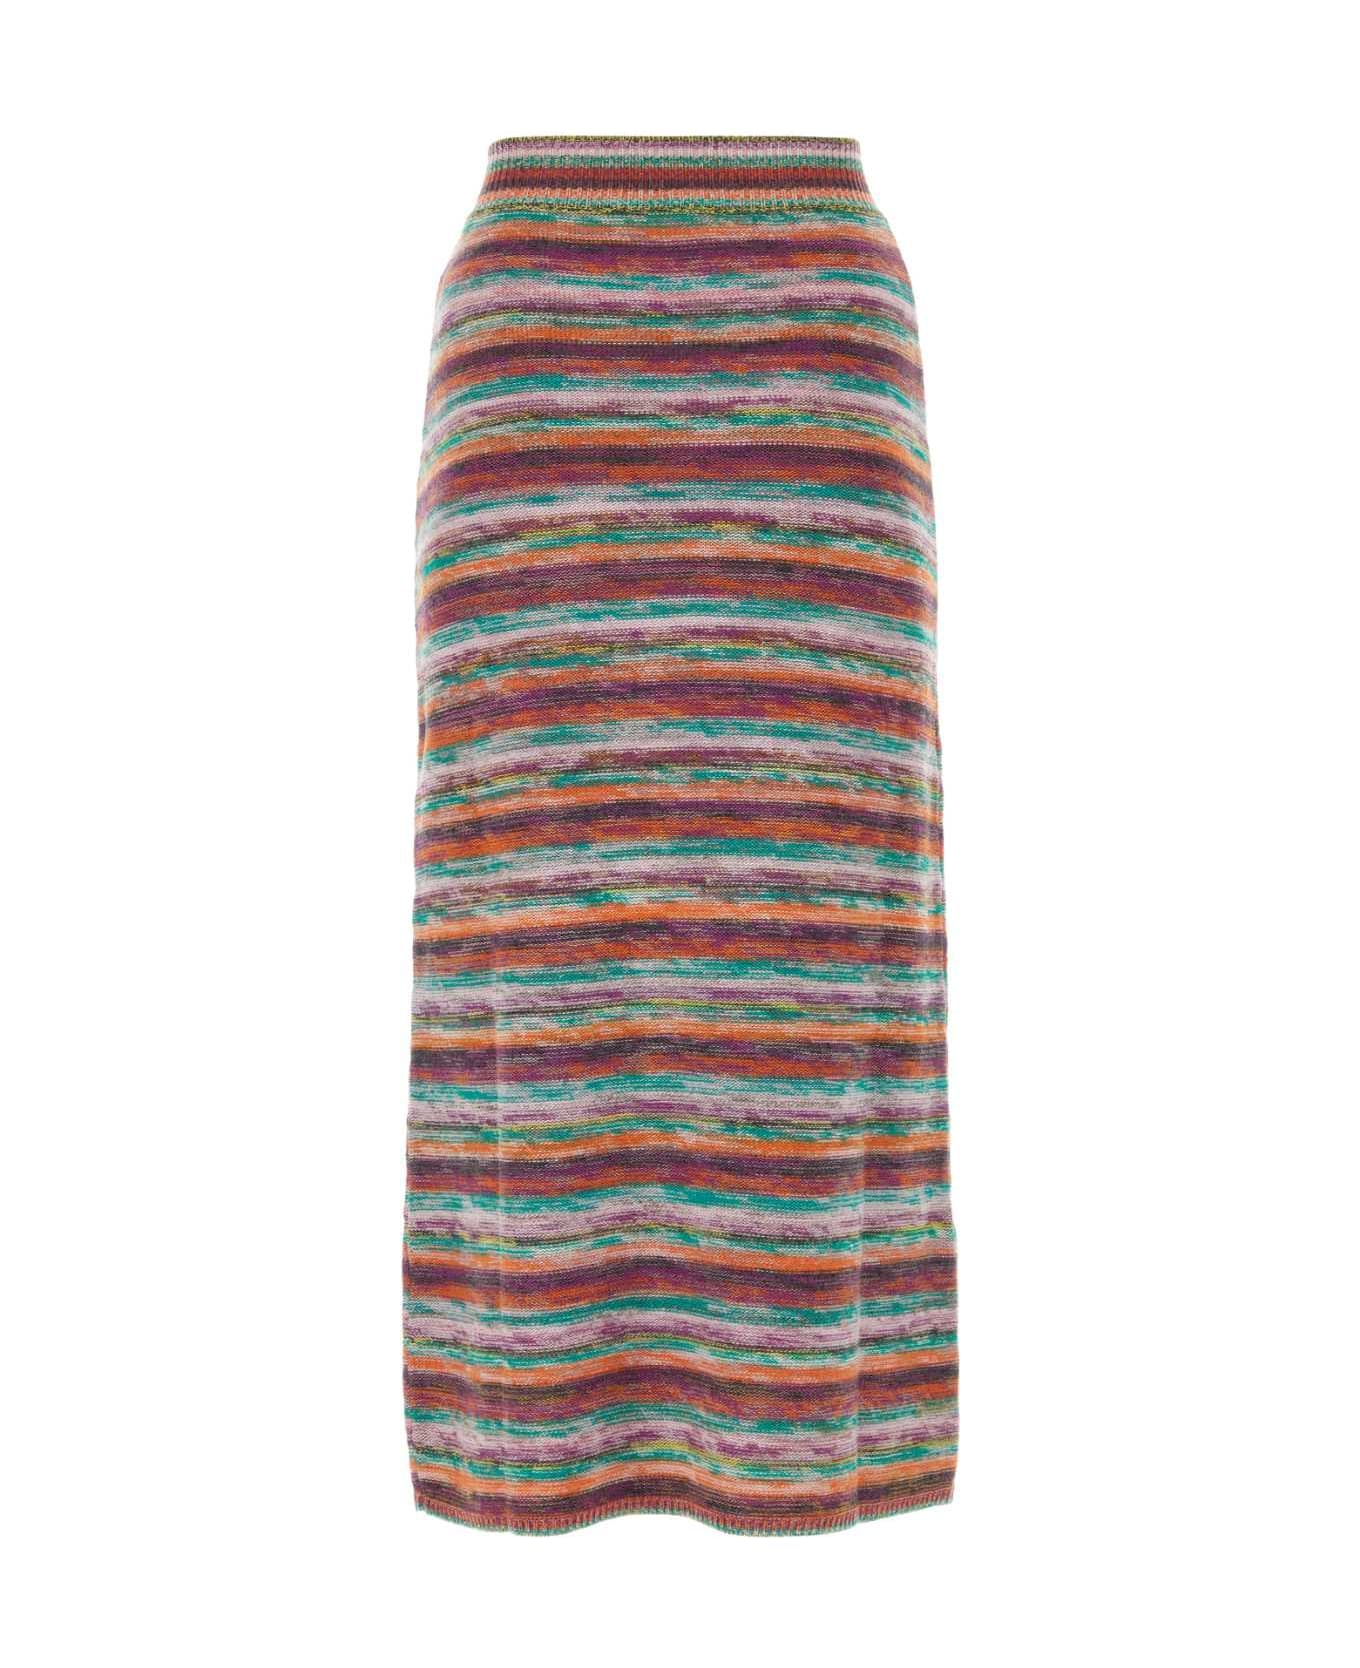 Chloé Embroidered Wool Blend Skirt - MULTICOLORBLACK